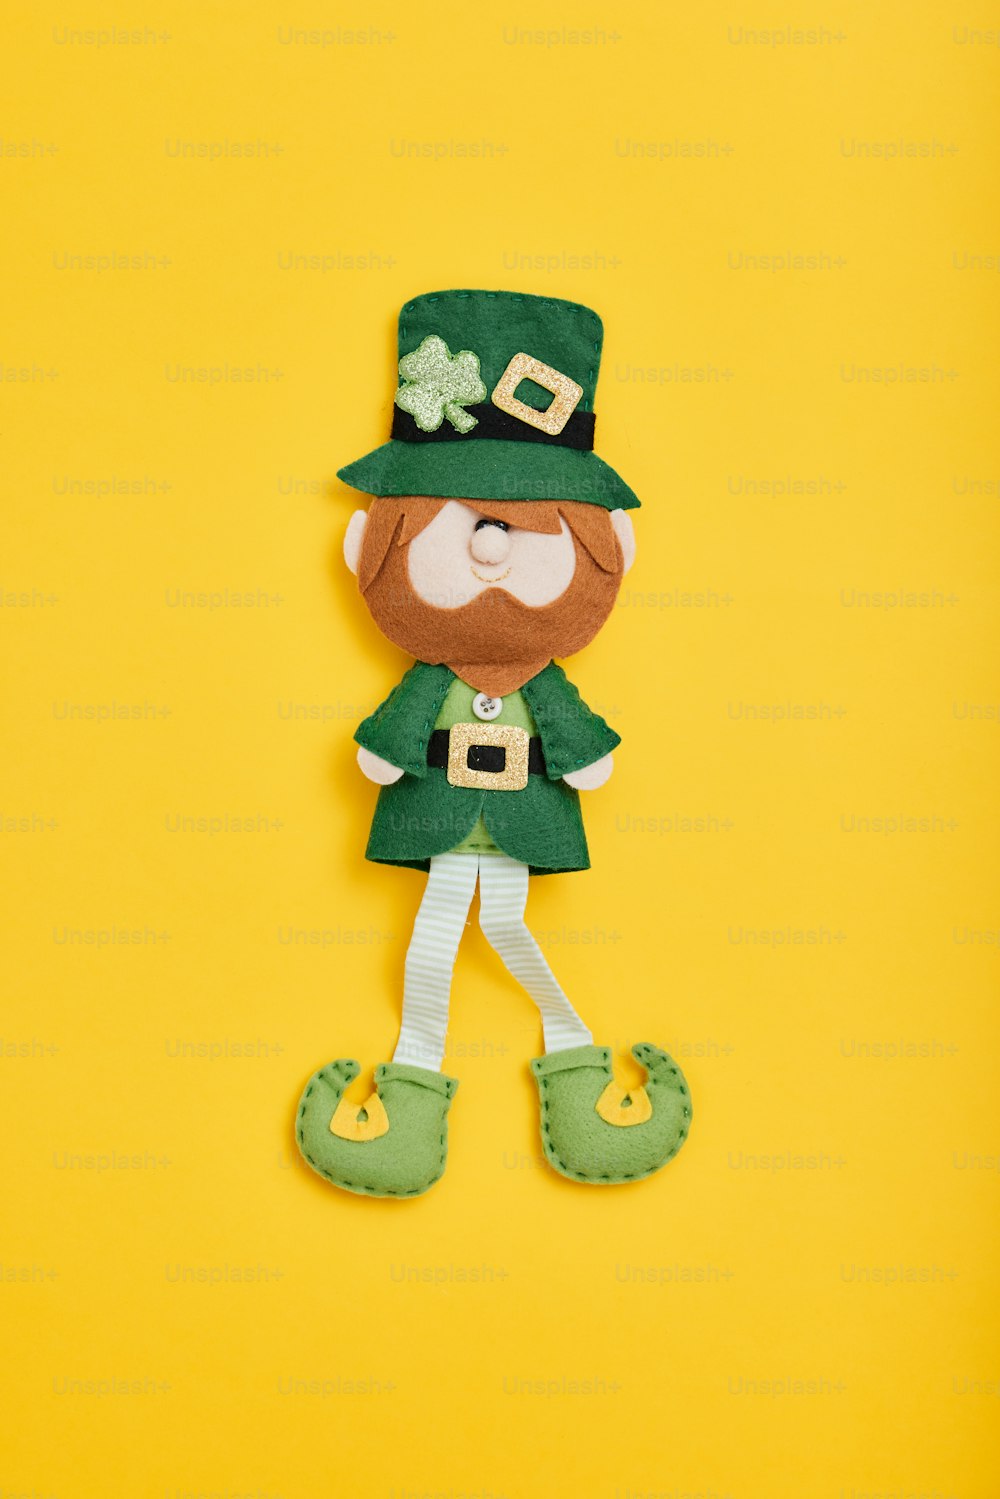 a paper cut out of a lepreite character on a yellow background